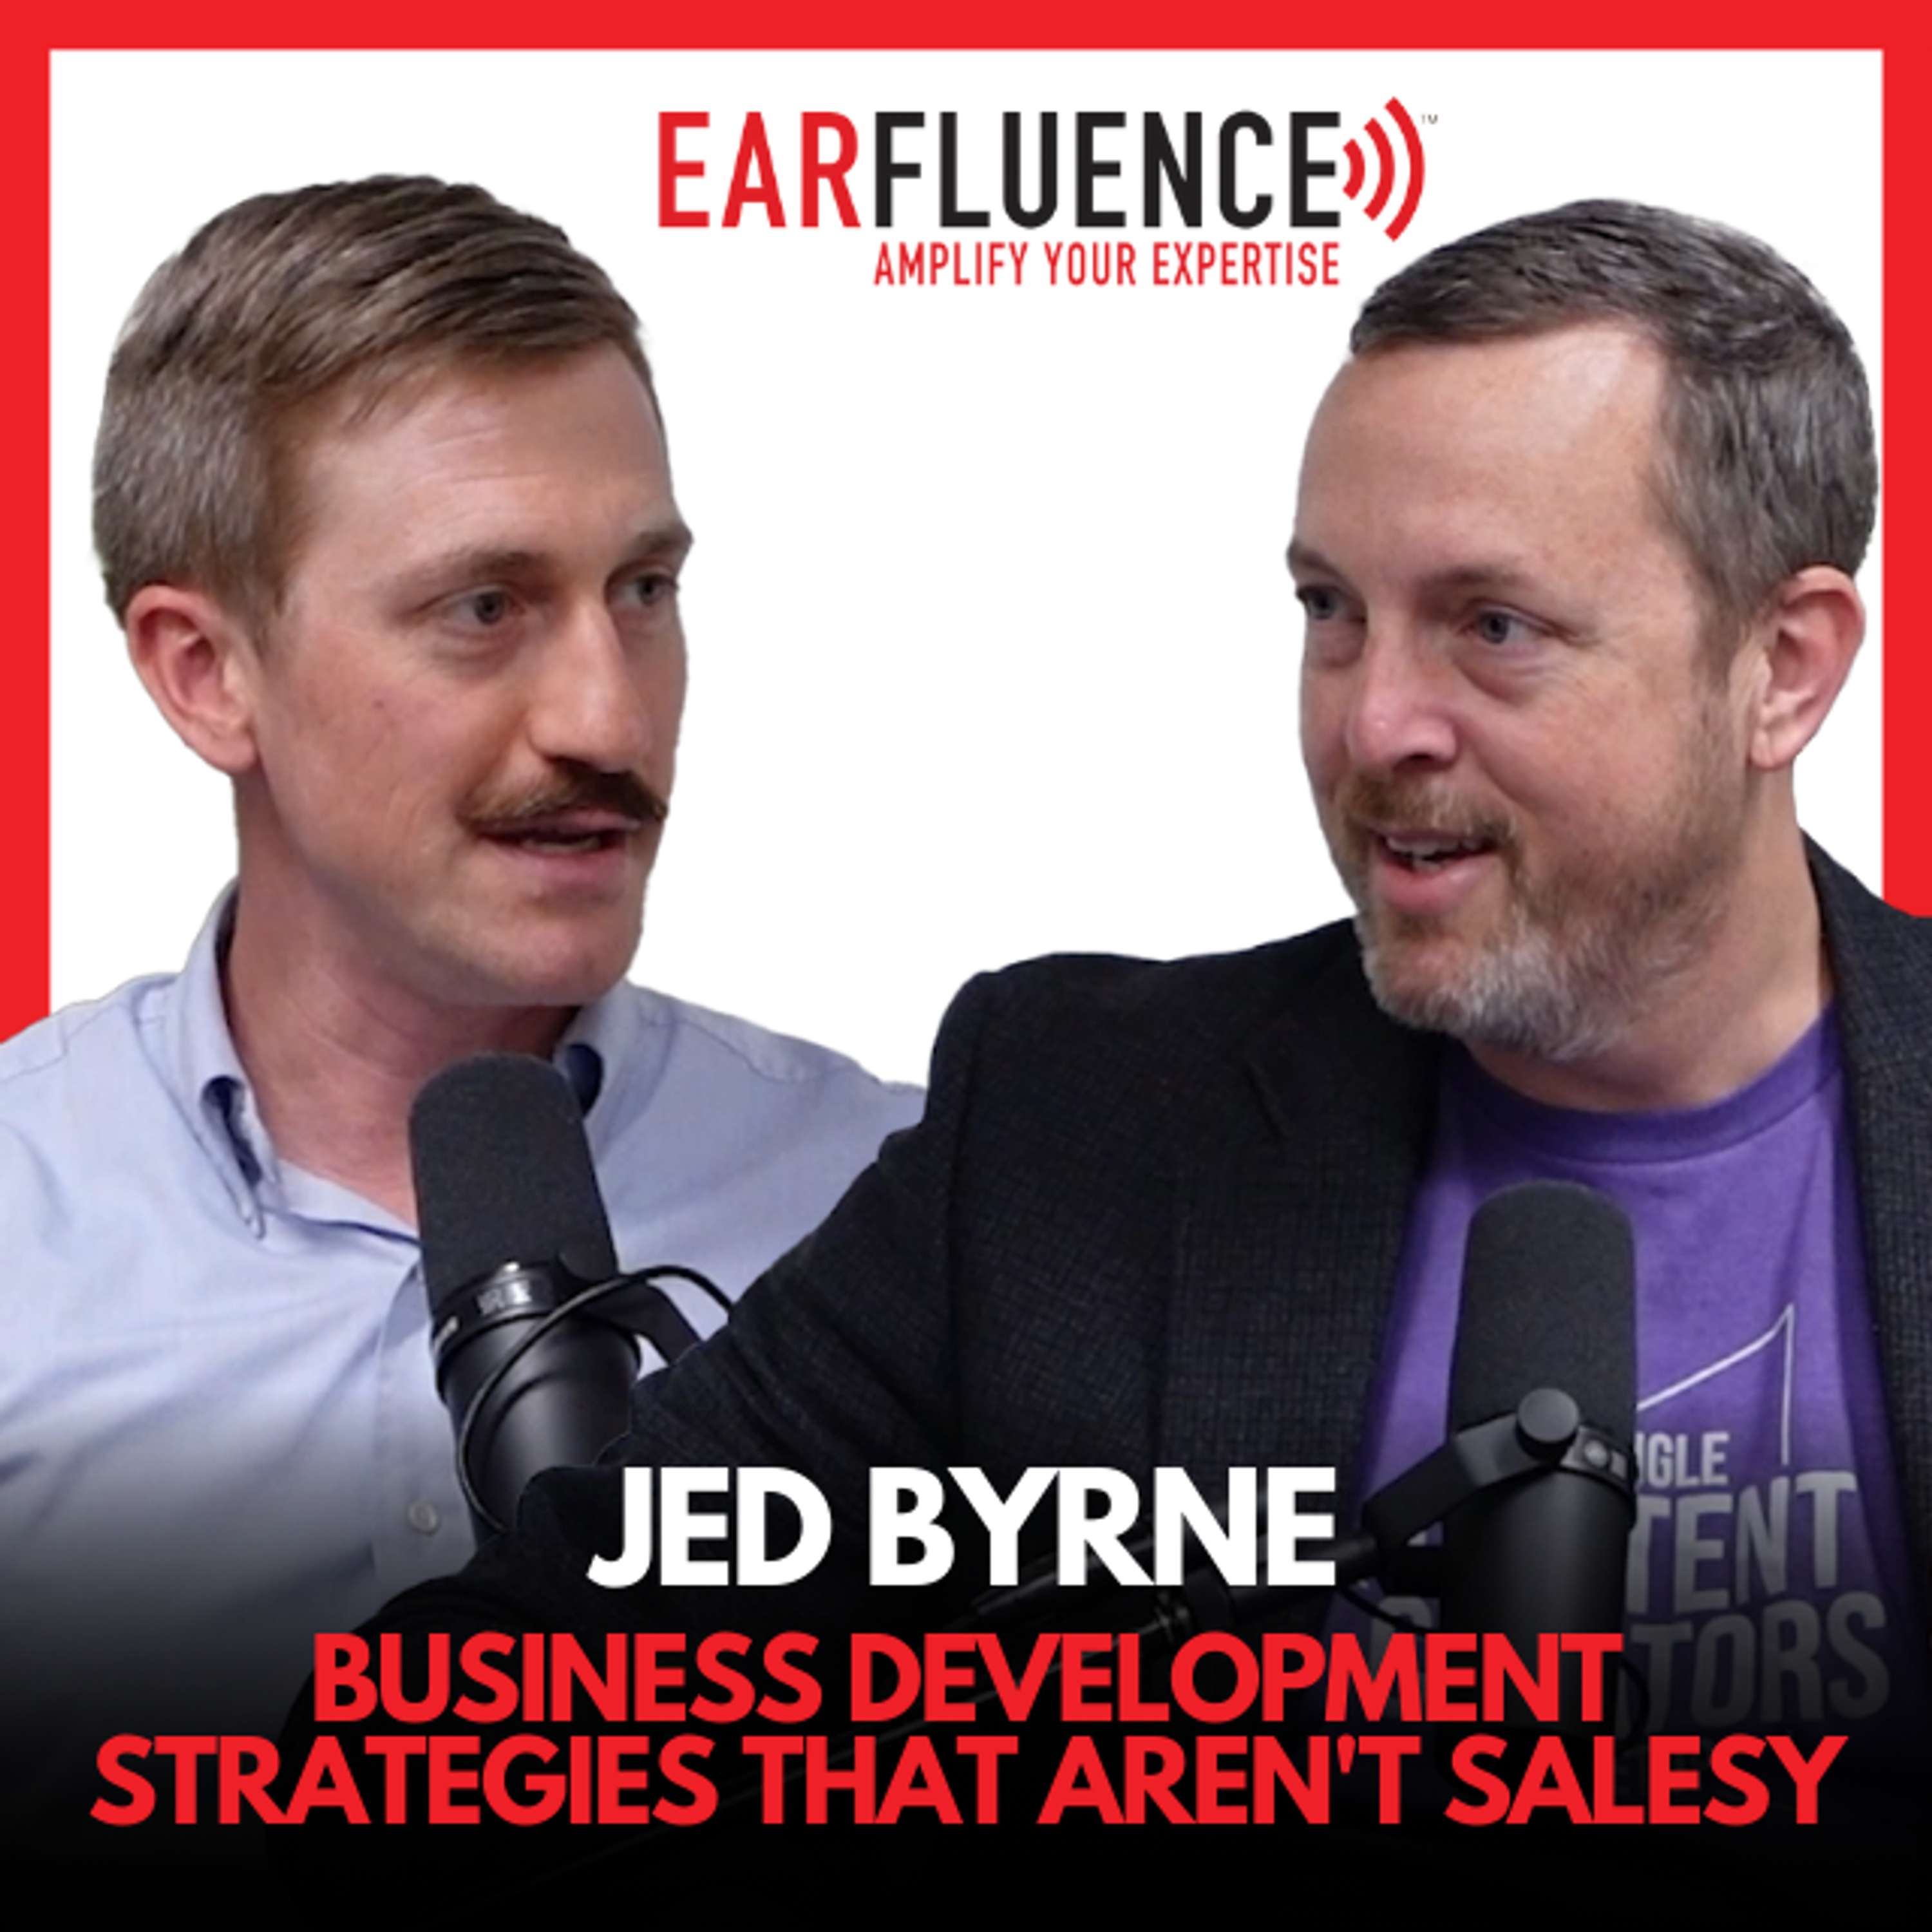 Scrappy Business Development Strategies That Aren’t Salesy, with Jed Byrne